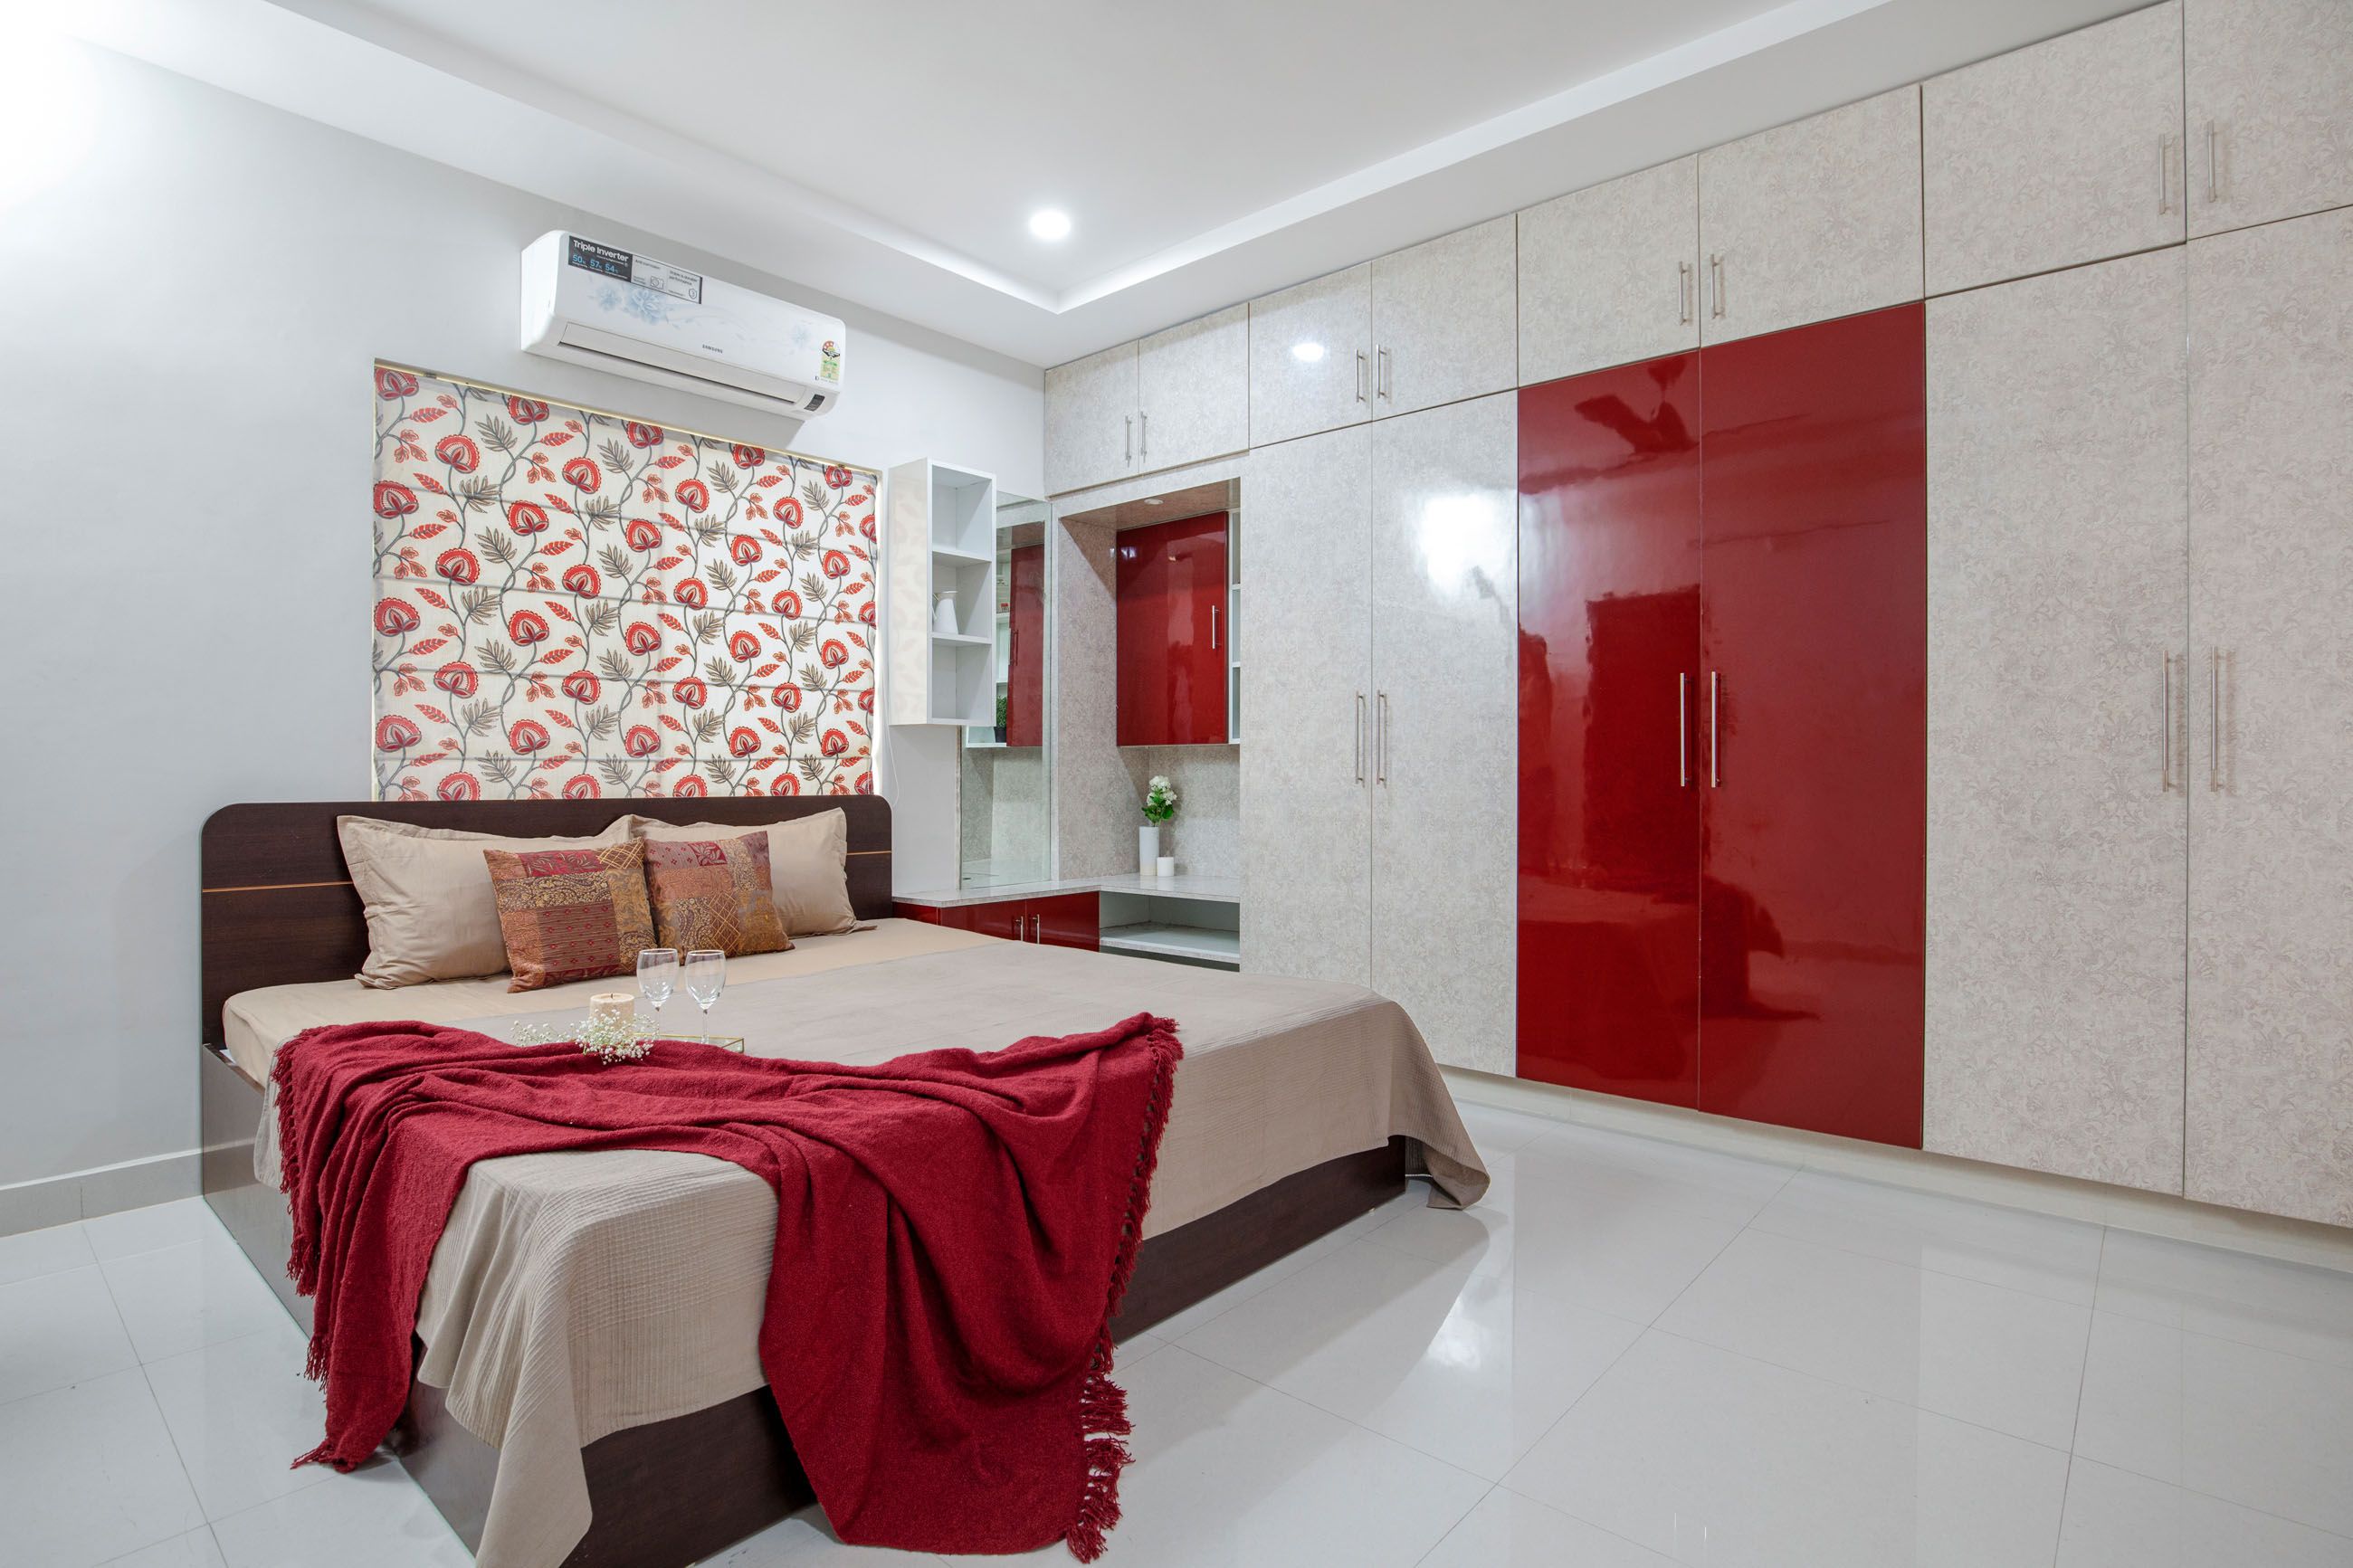 Modern Beige And Red Guest Room Design With 6-Door Glossy Swing Wardrobe